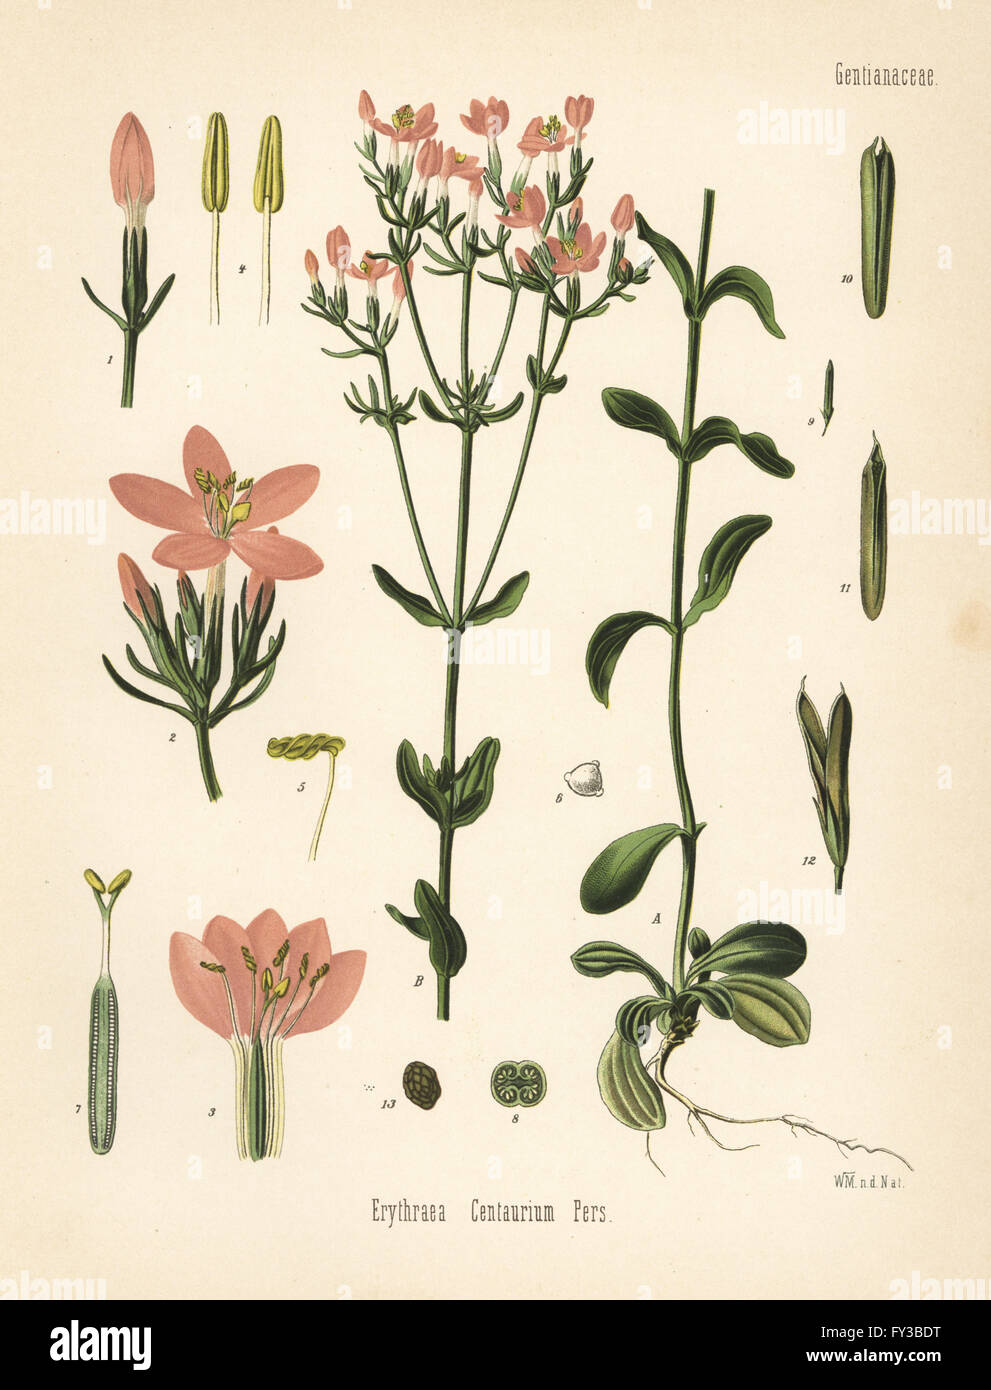 Centaury, Centaurium erythraea (Erythraea centaurium). Chromolithograph after a botanical illustration by Walther Muller from Hermann Adolph Koehler's Medicinal Plants, edited by Gustav Pabst, Koehler, Germany, 1887. Stock Photo